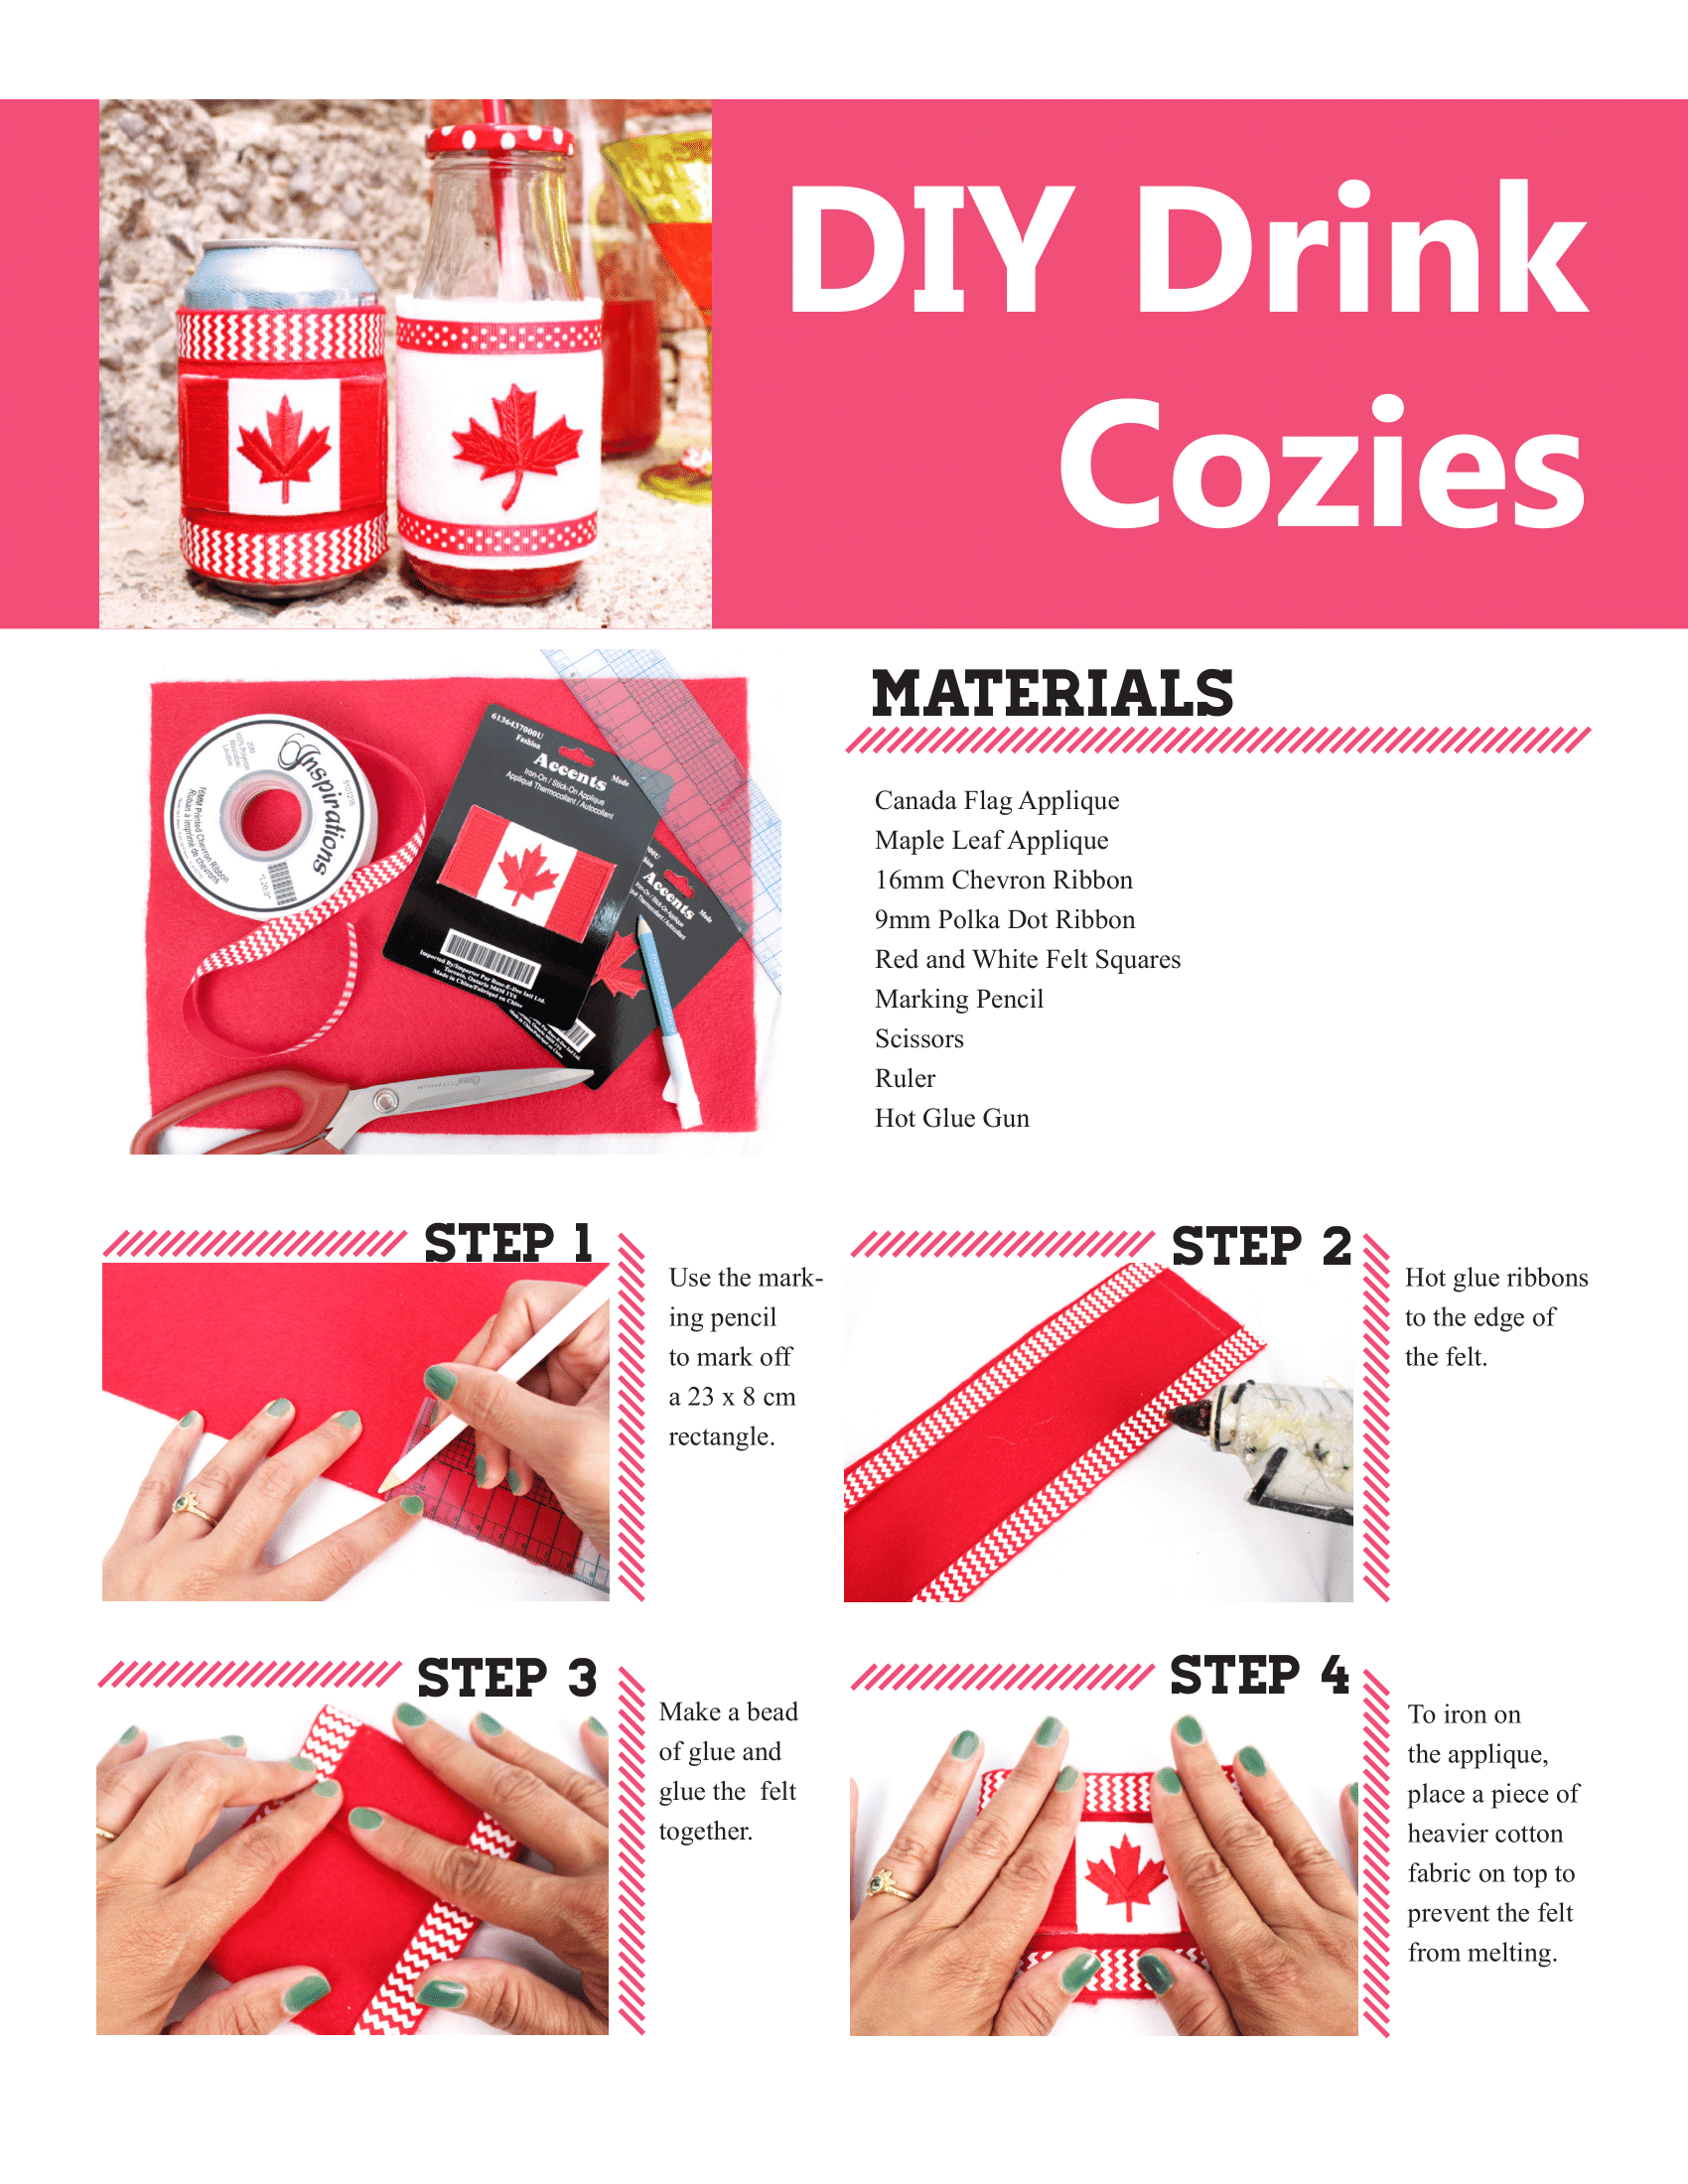 Materials & steps to make your drink cozies